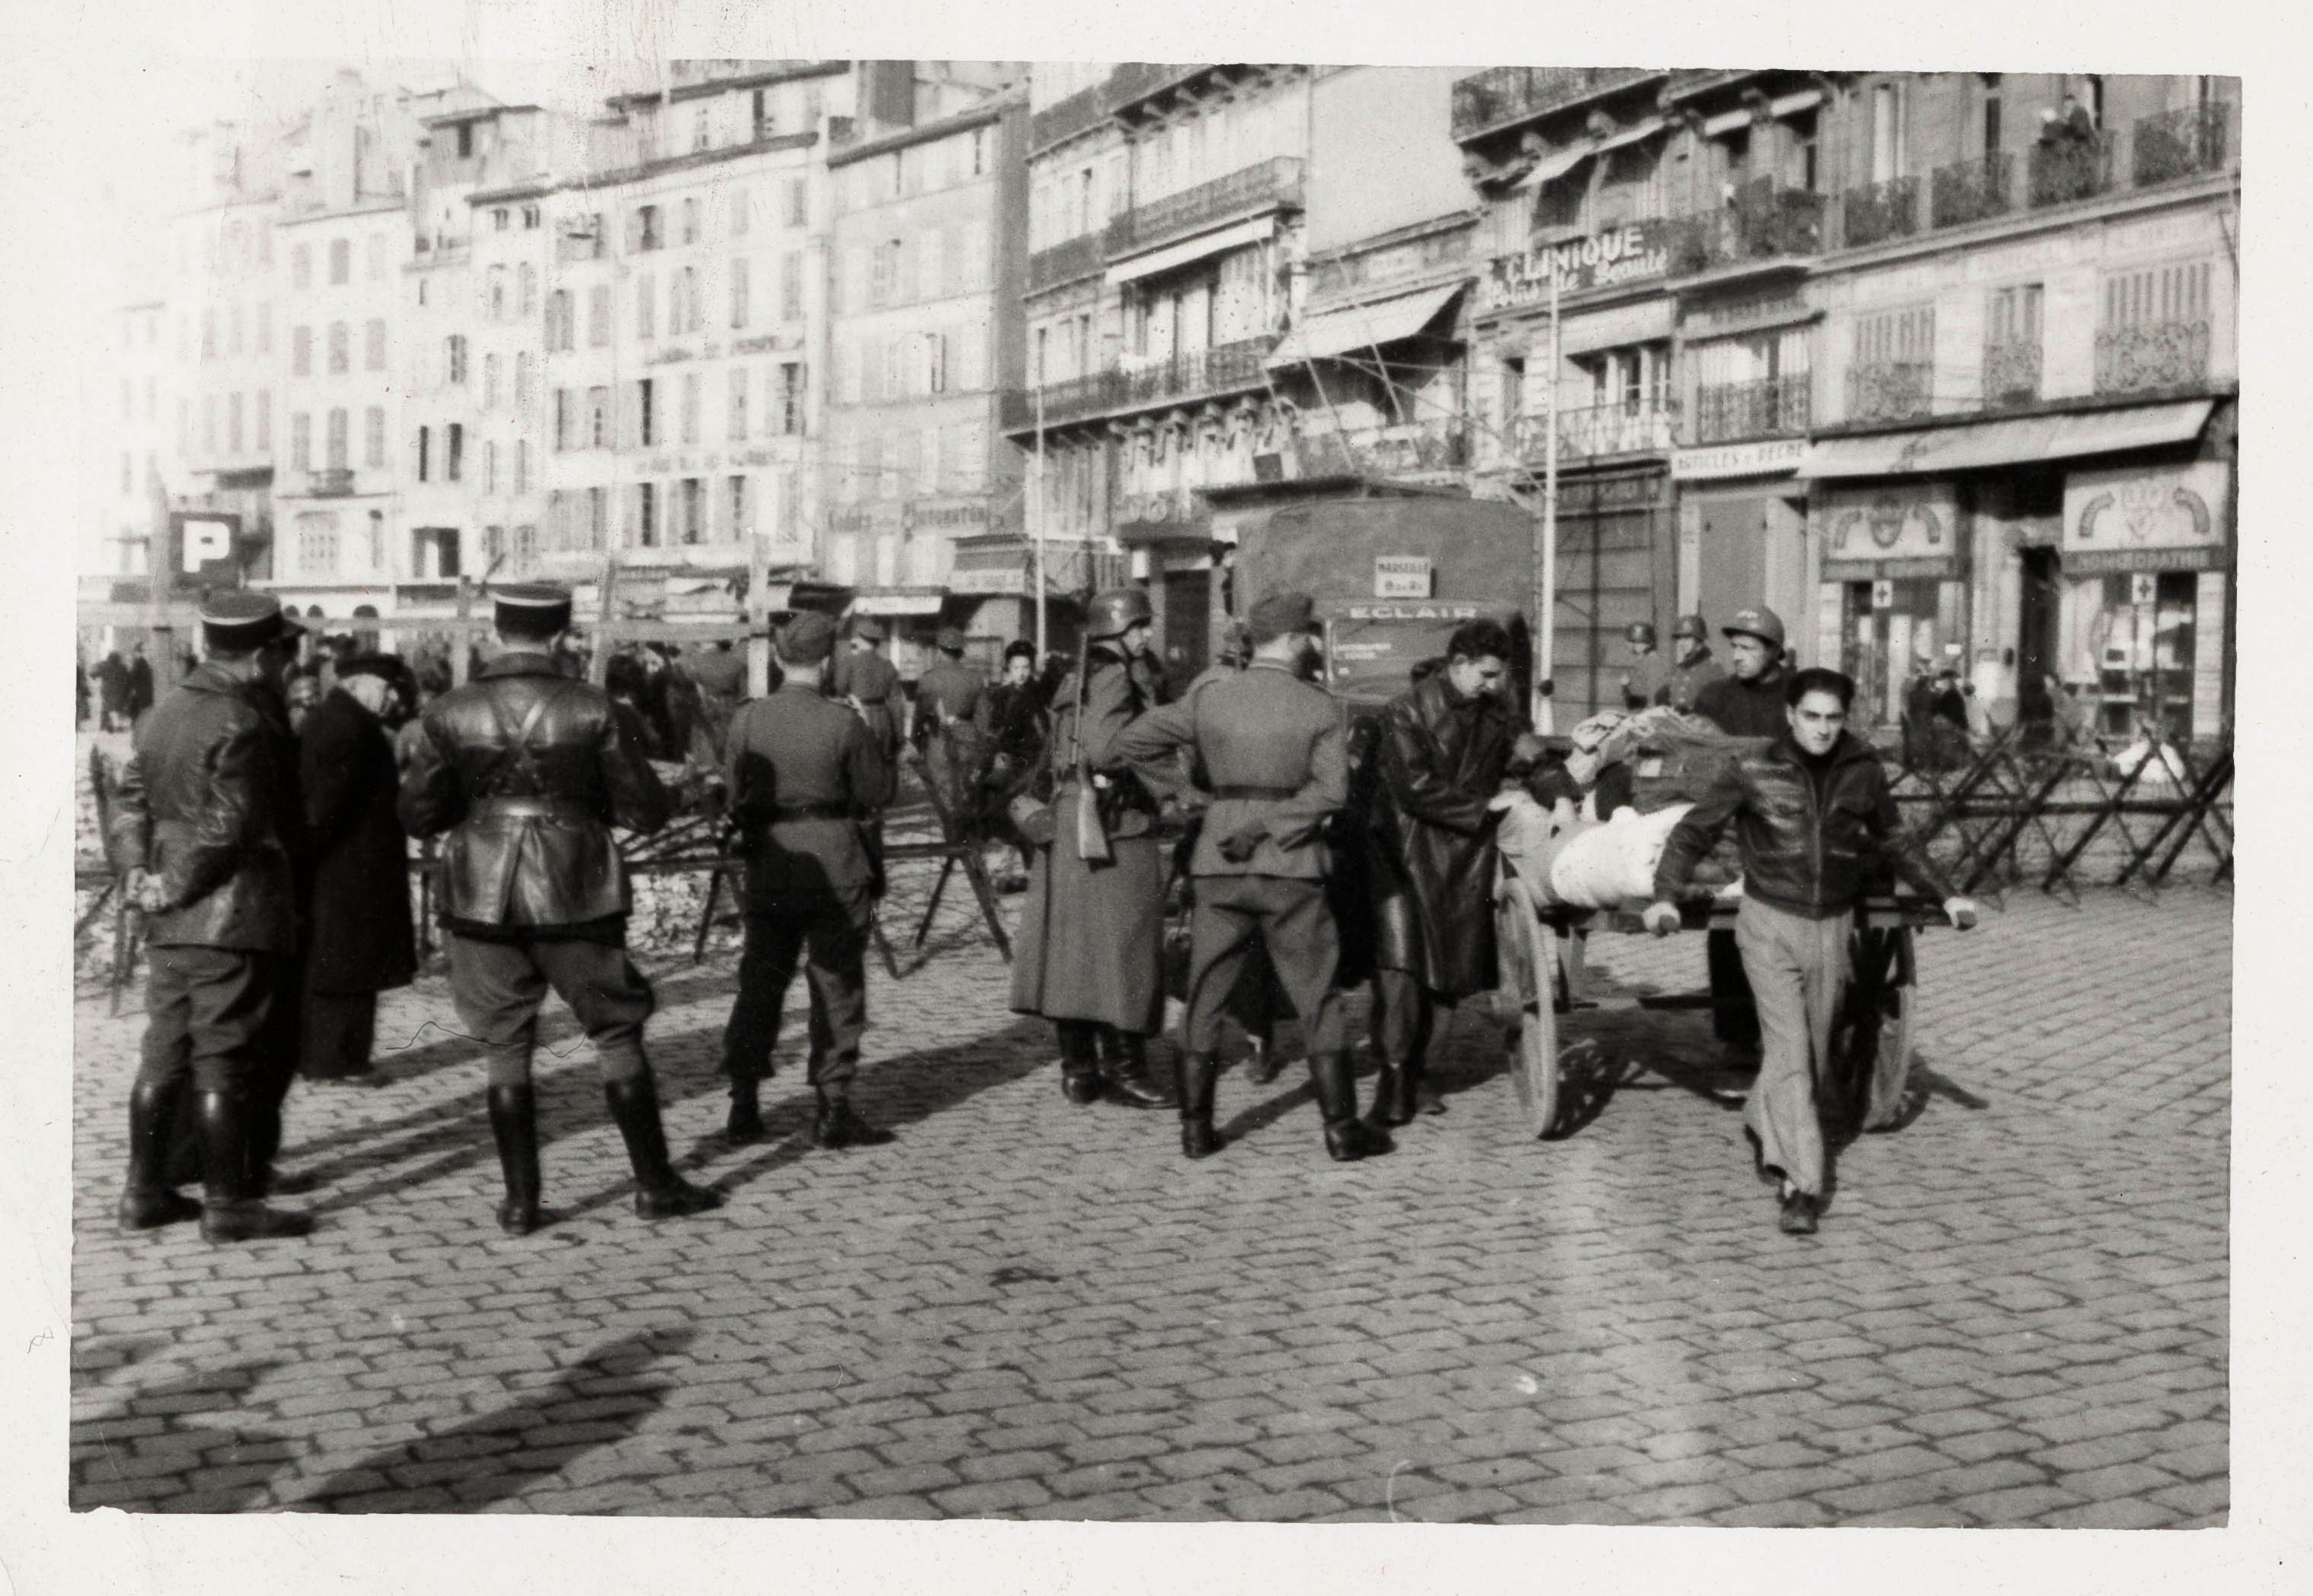 German soldiers rounding up Jews in Marseille’s Vieux-Port in January 1943.